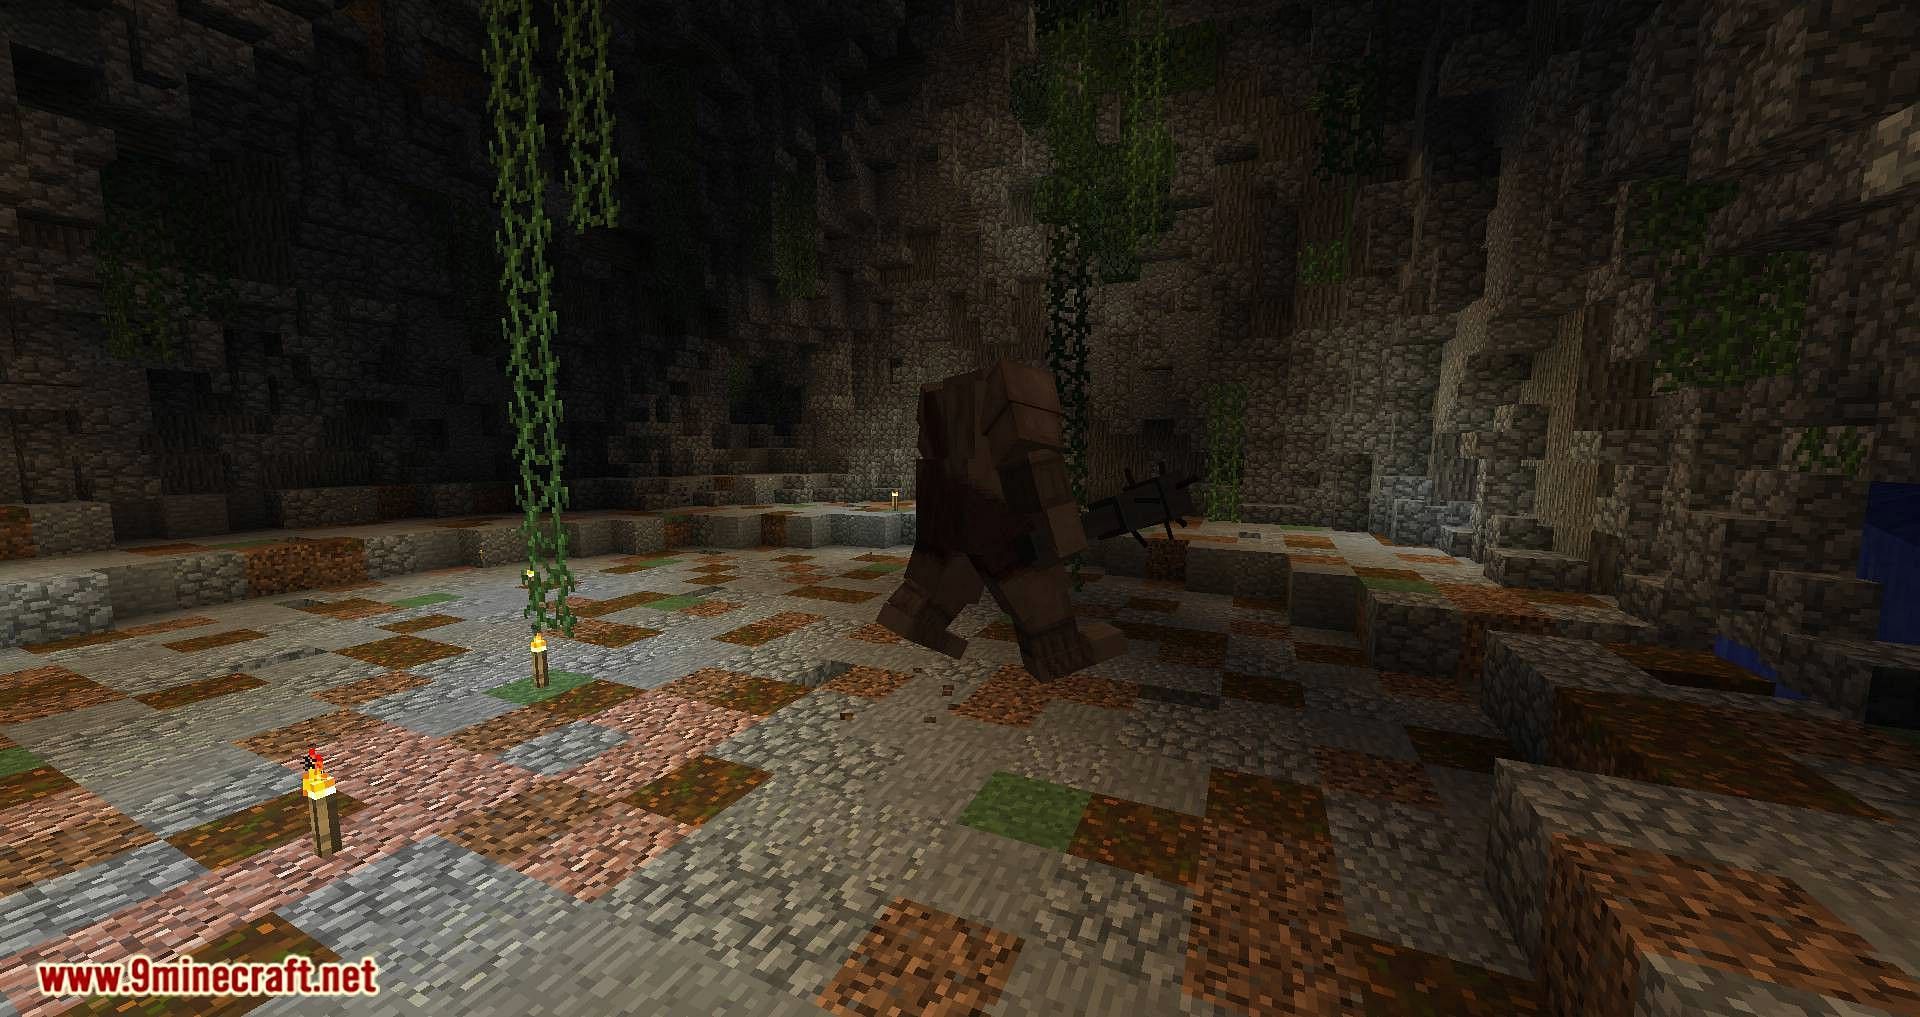 The Cyclops added to the game (Image via 9Minecraft)